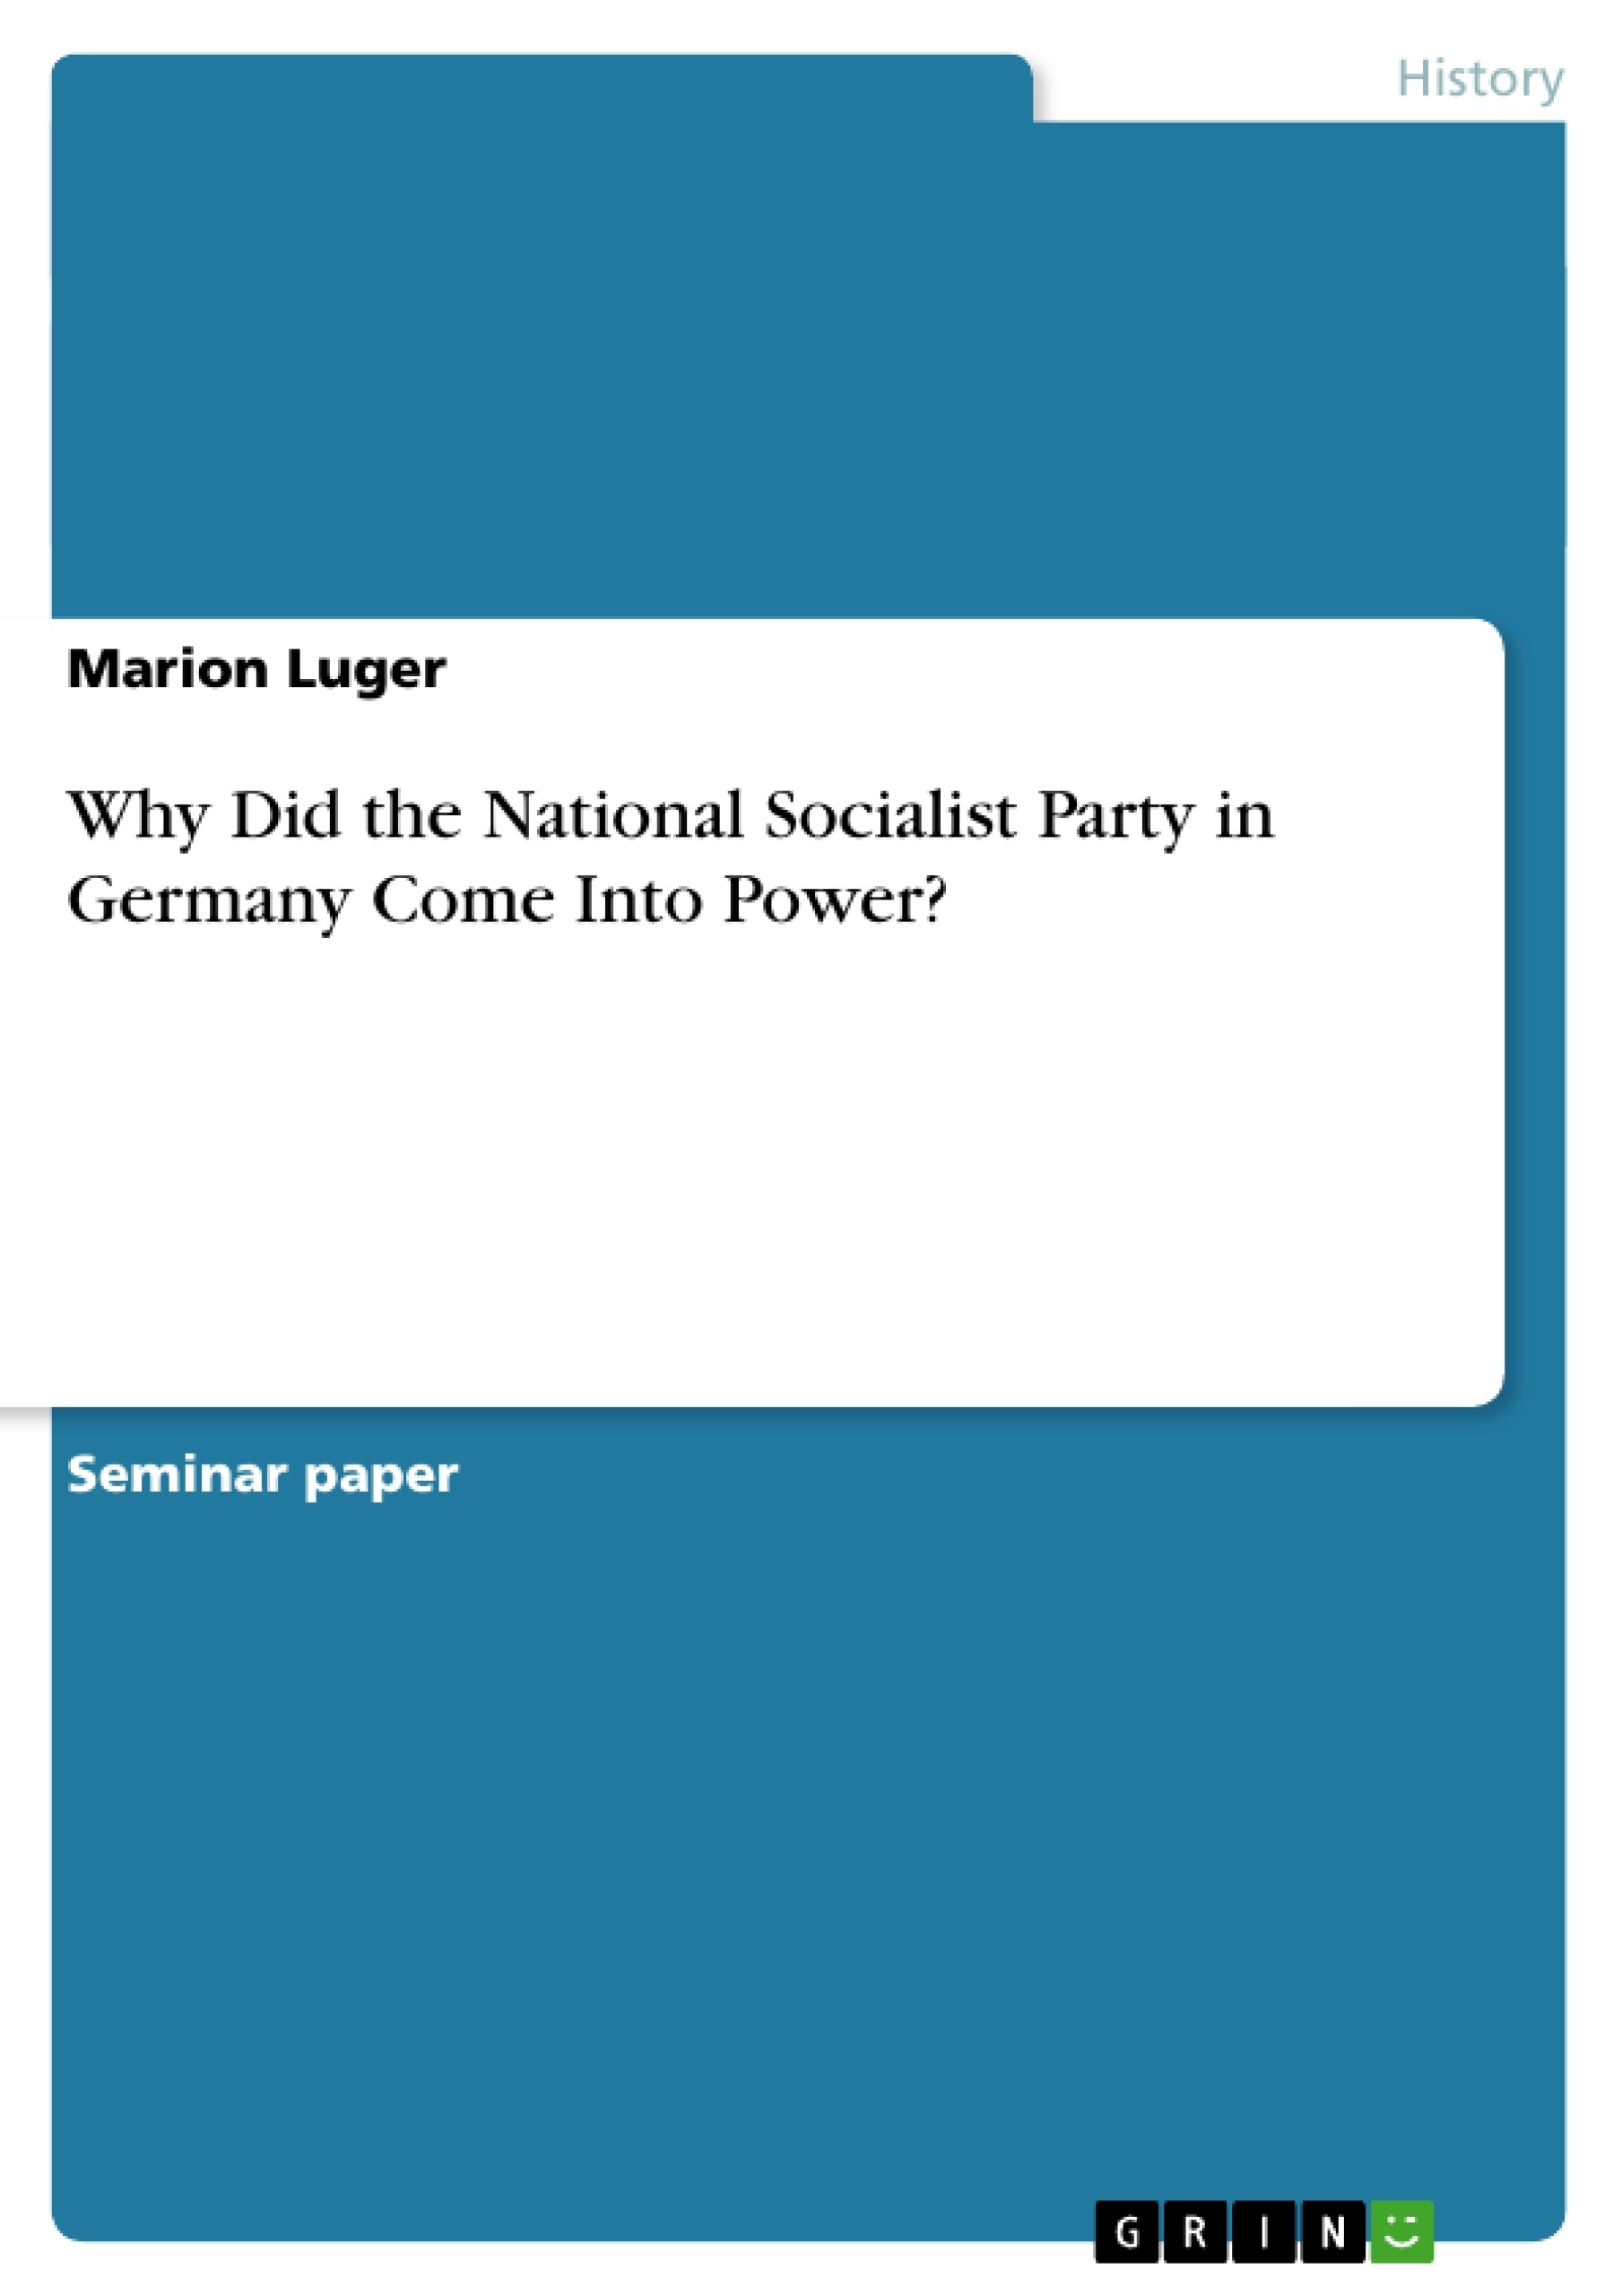 Title: Why Did the National Socialist Party in Germany Come Into Power?